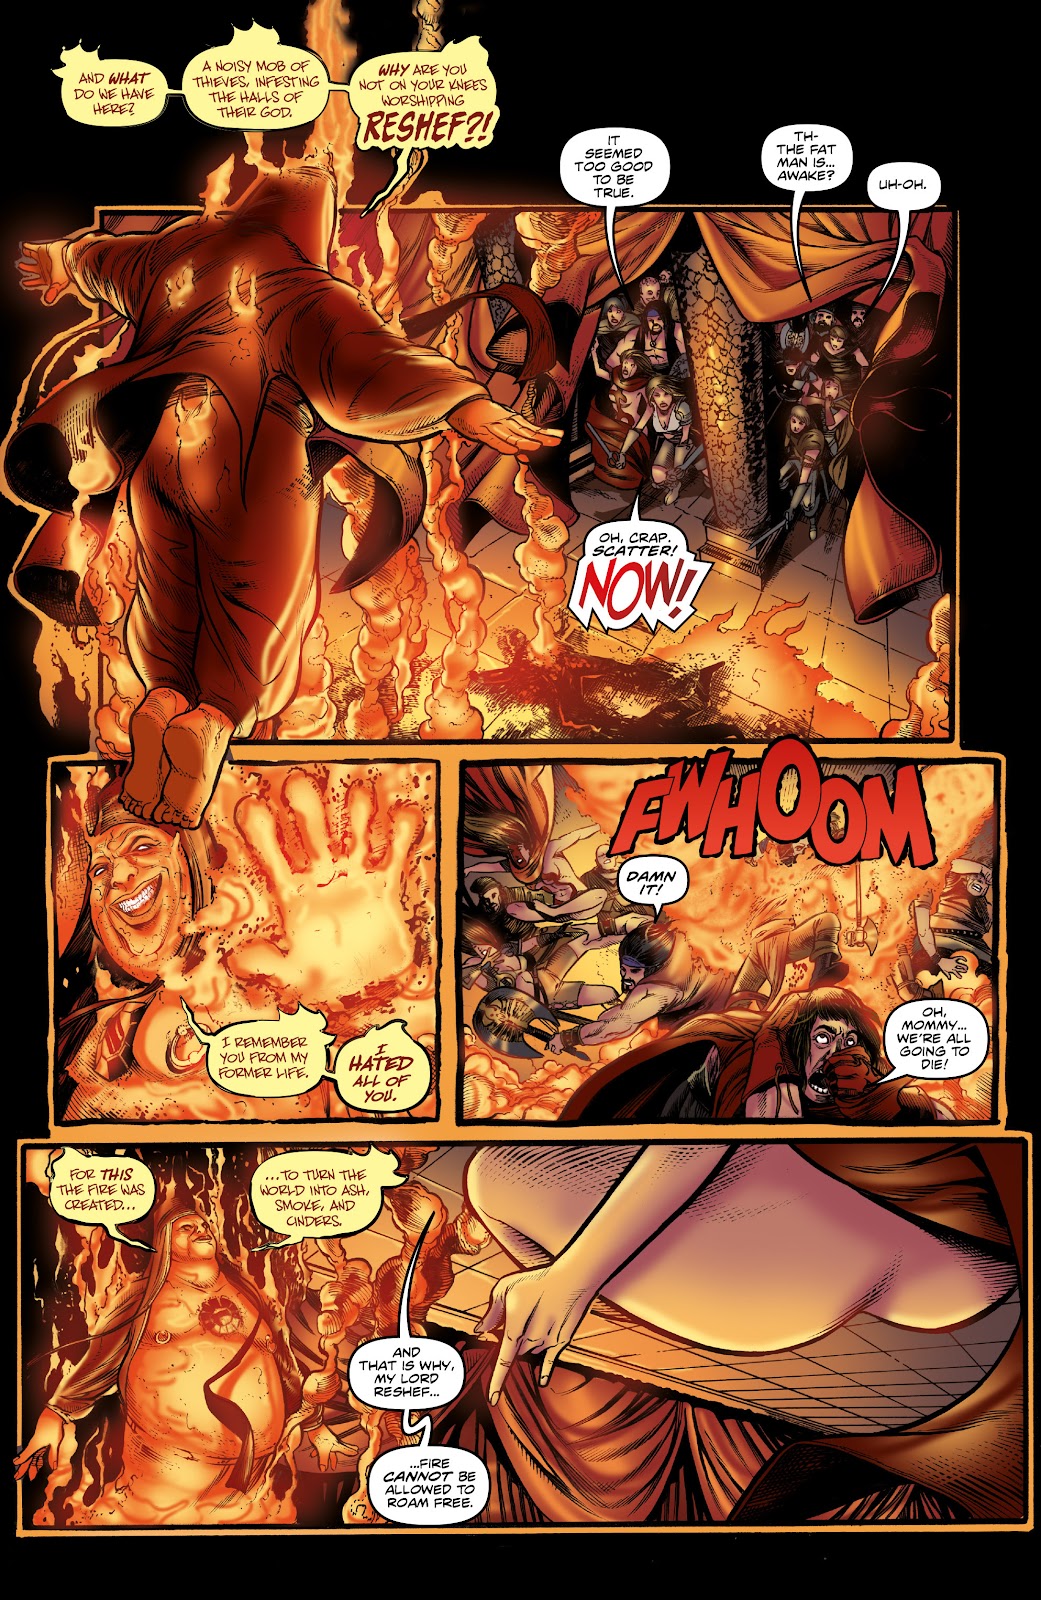 Rogues!: The Burning Heart issue 3 - Page 14